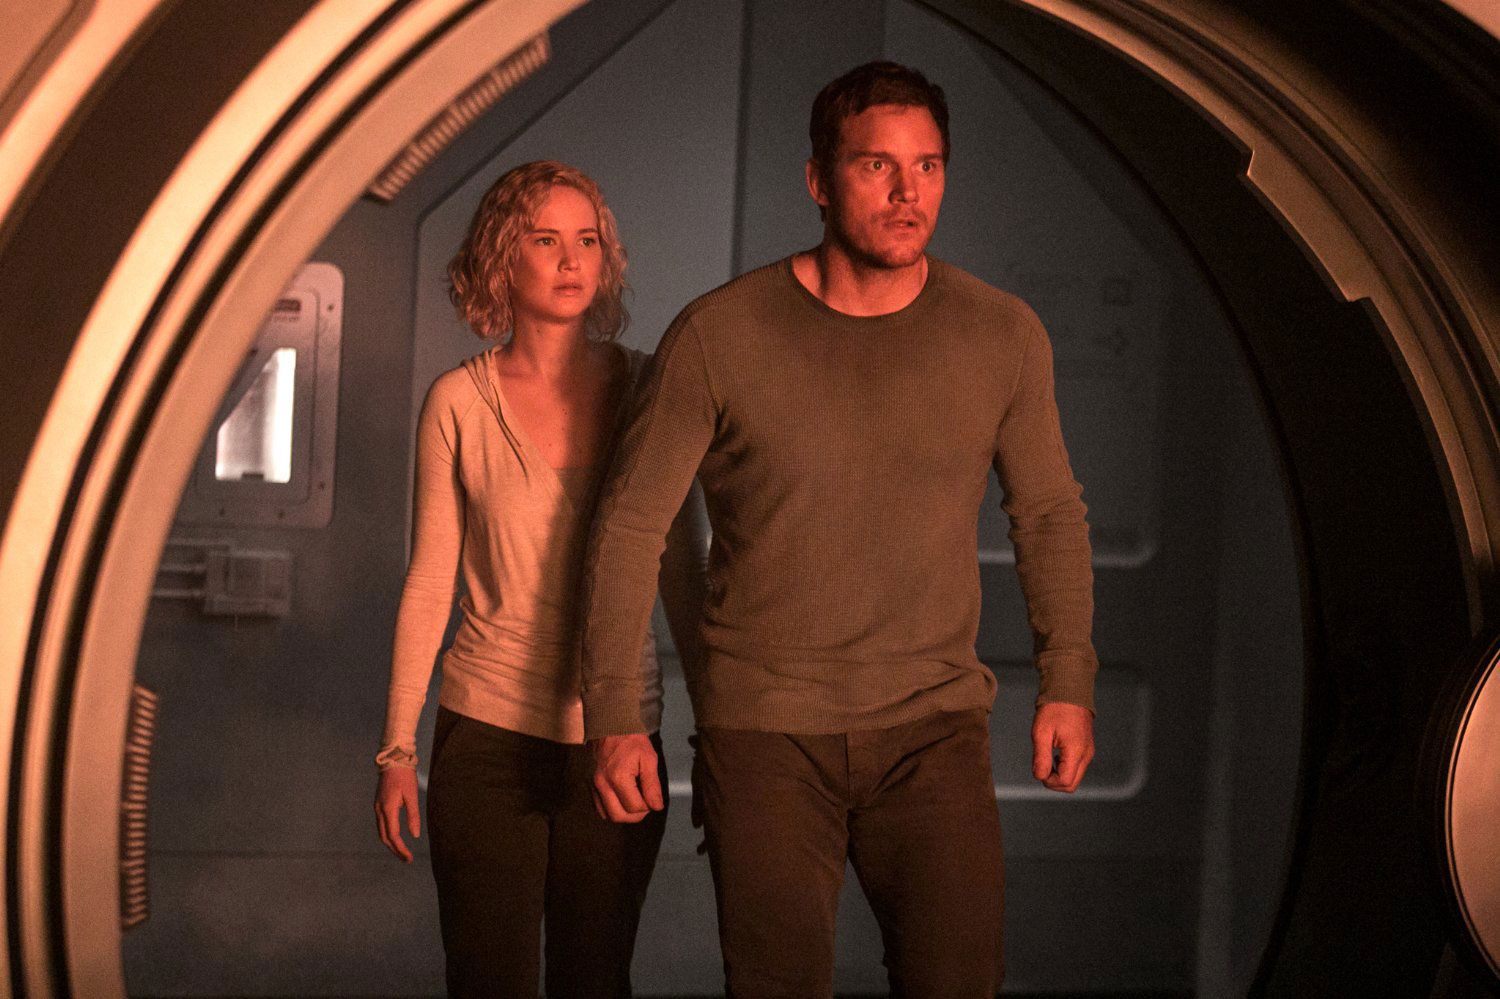 The film 'Passengers' highlights the crazy distances and times of